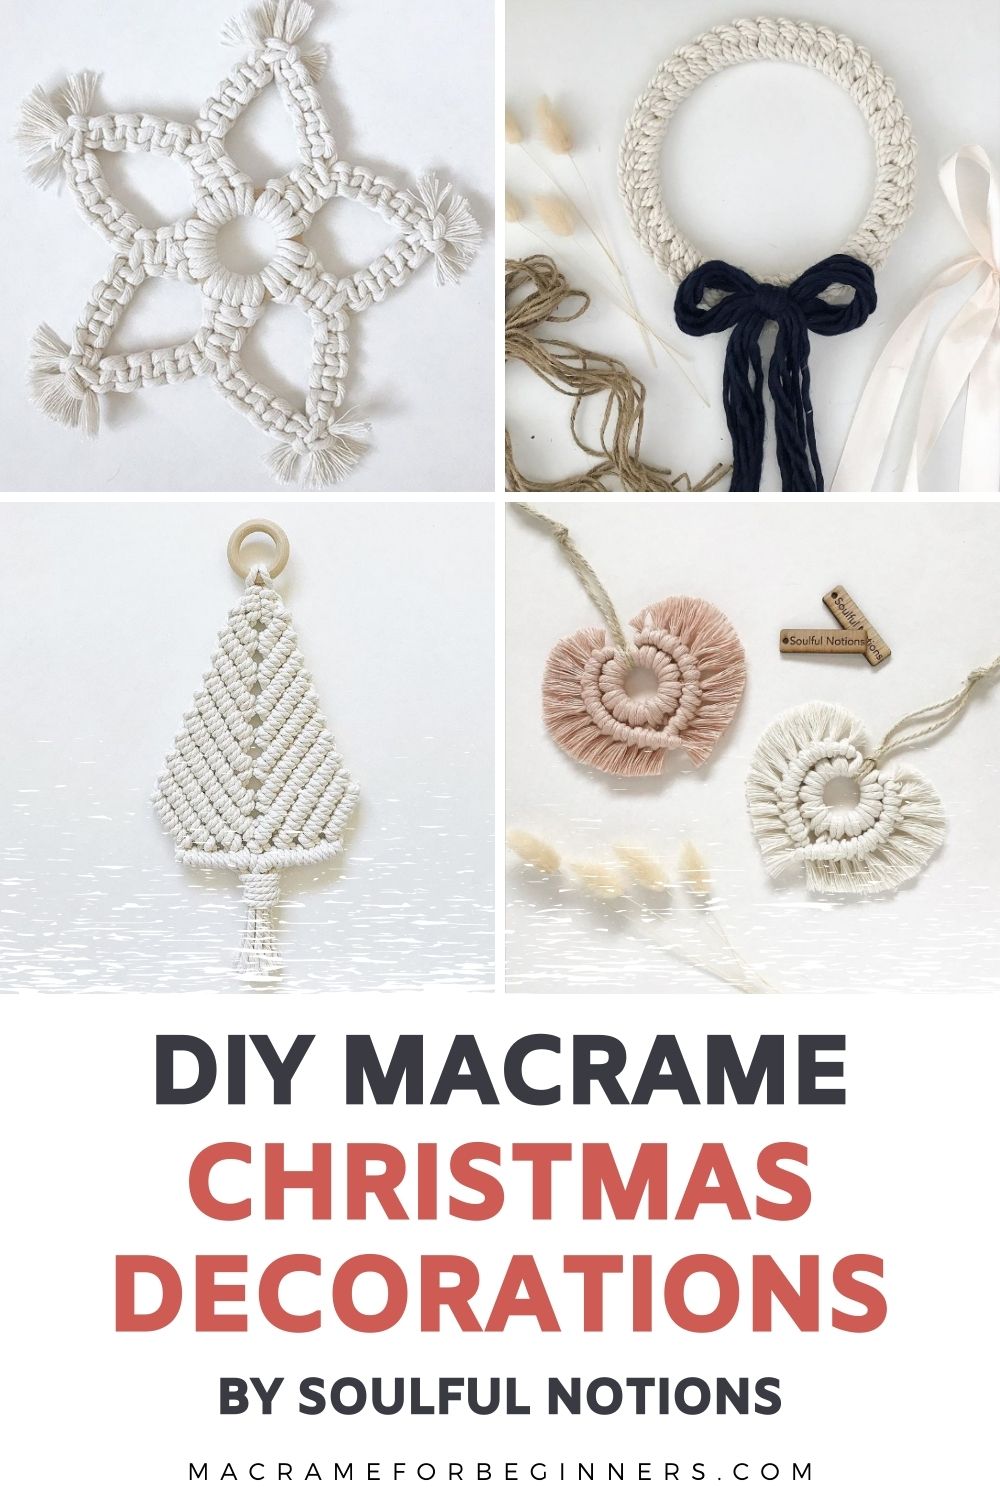 Make Your Own Gorgeous Macrame Christmas Decorations – Easy Video Tutorials by Soulful Notions